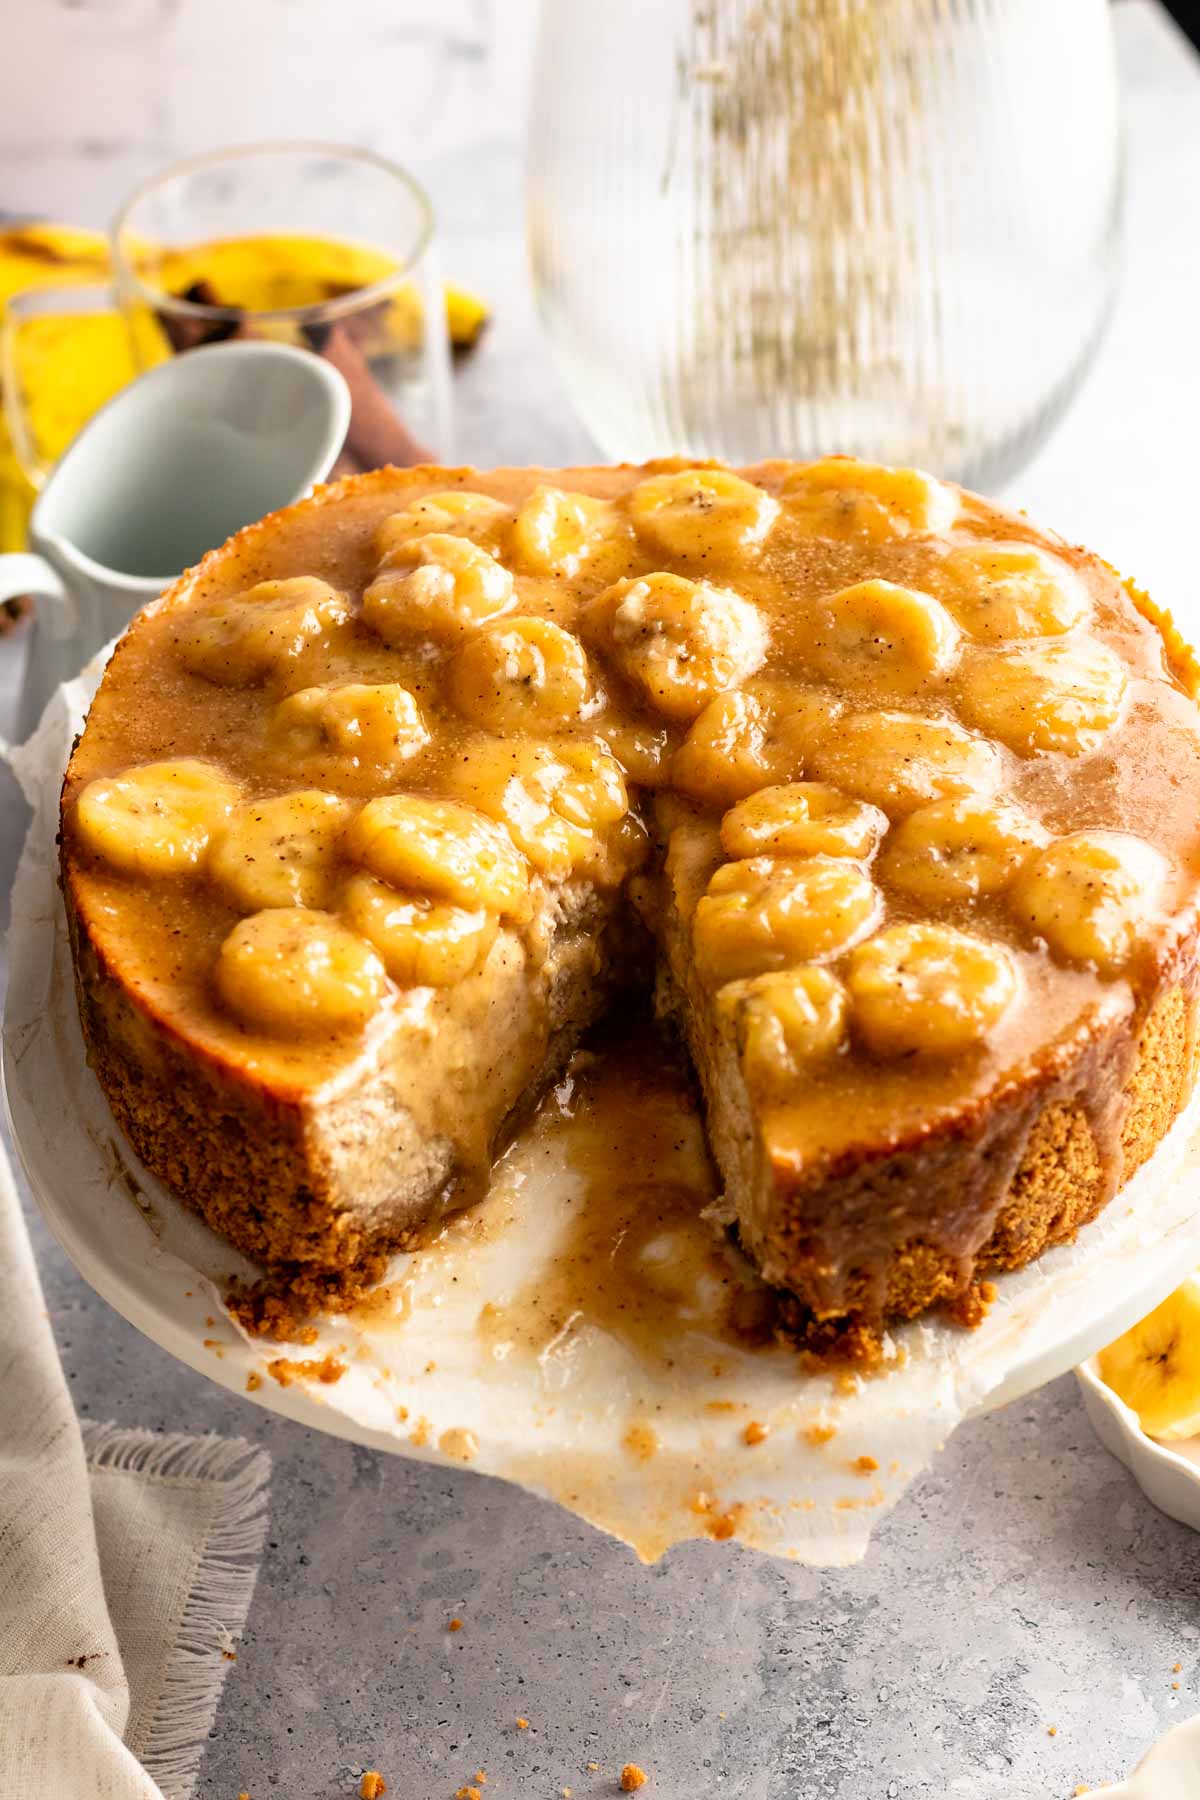 Close up shot of a cheesecake with bananas foster topping.